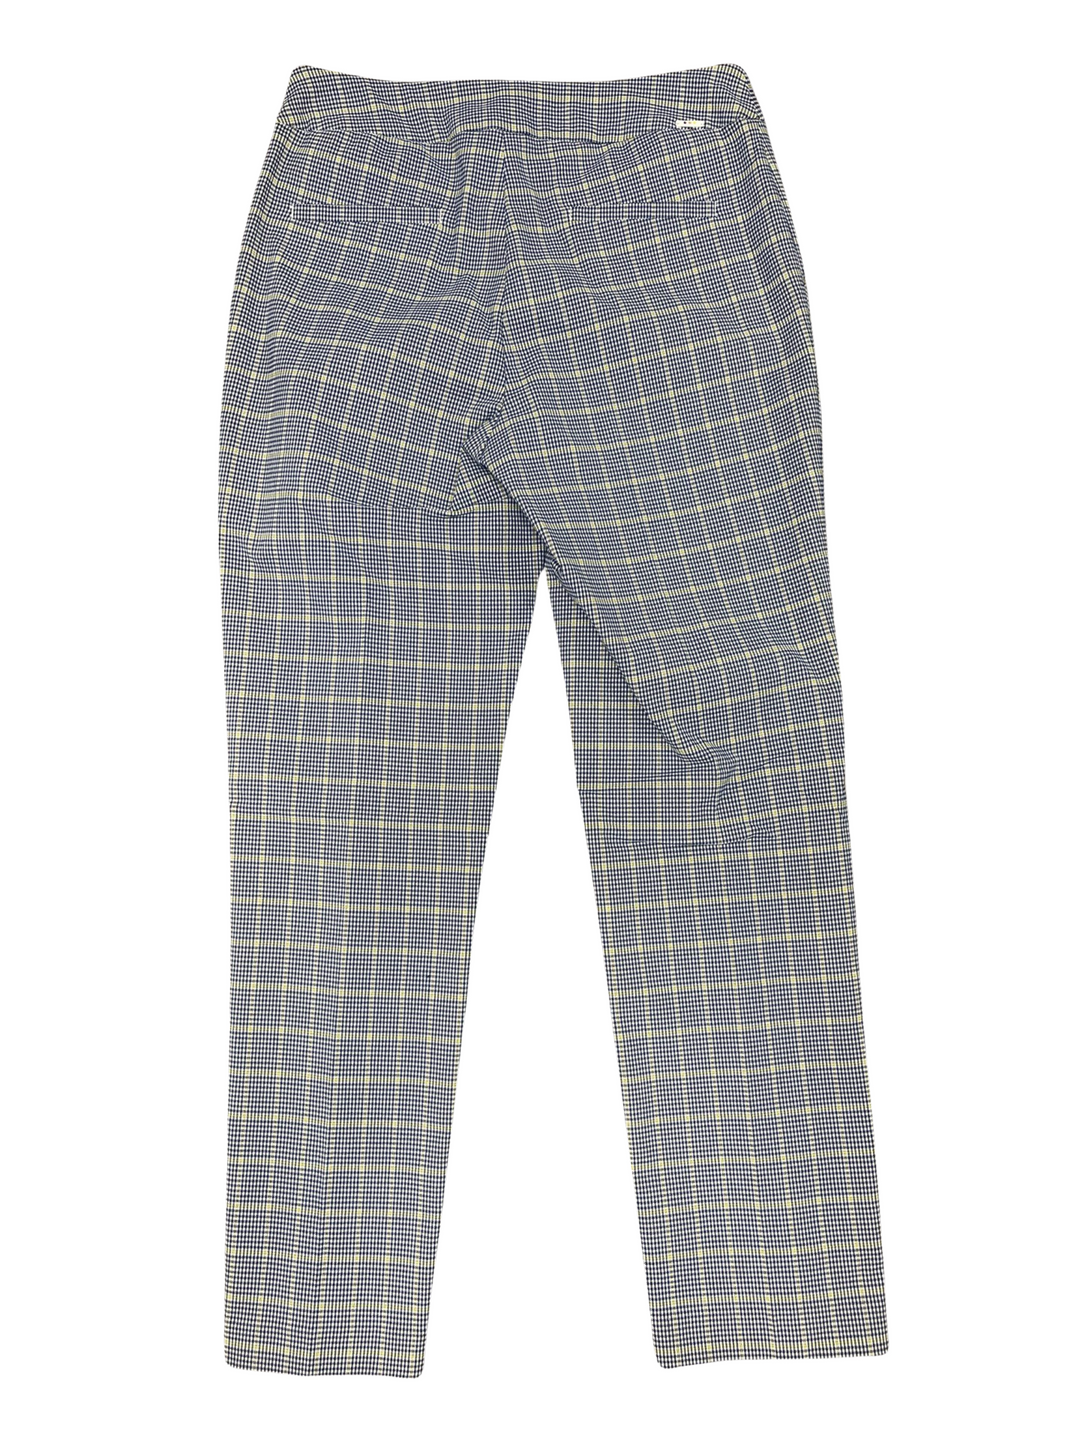 Swing Control Techno Lucca Plaid Ankle Pant